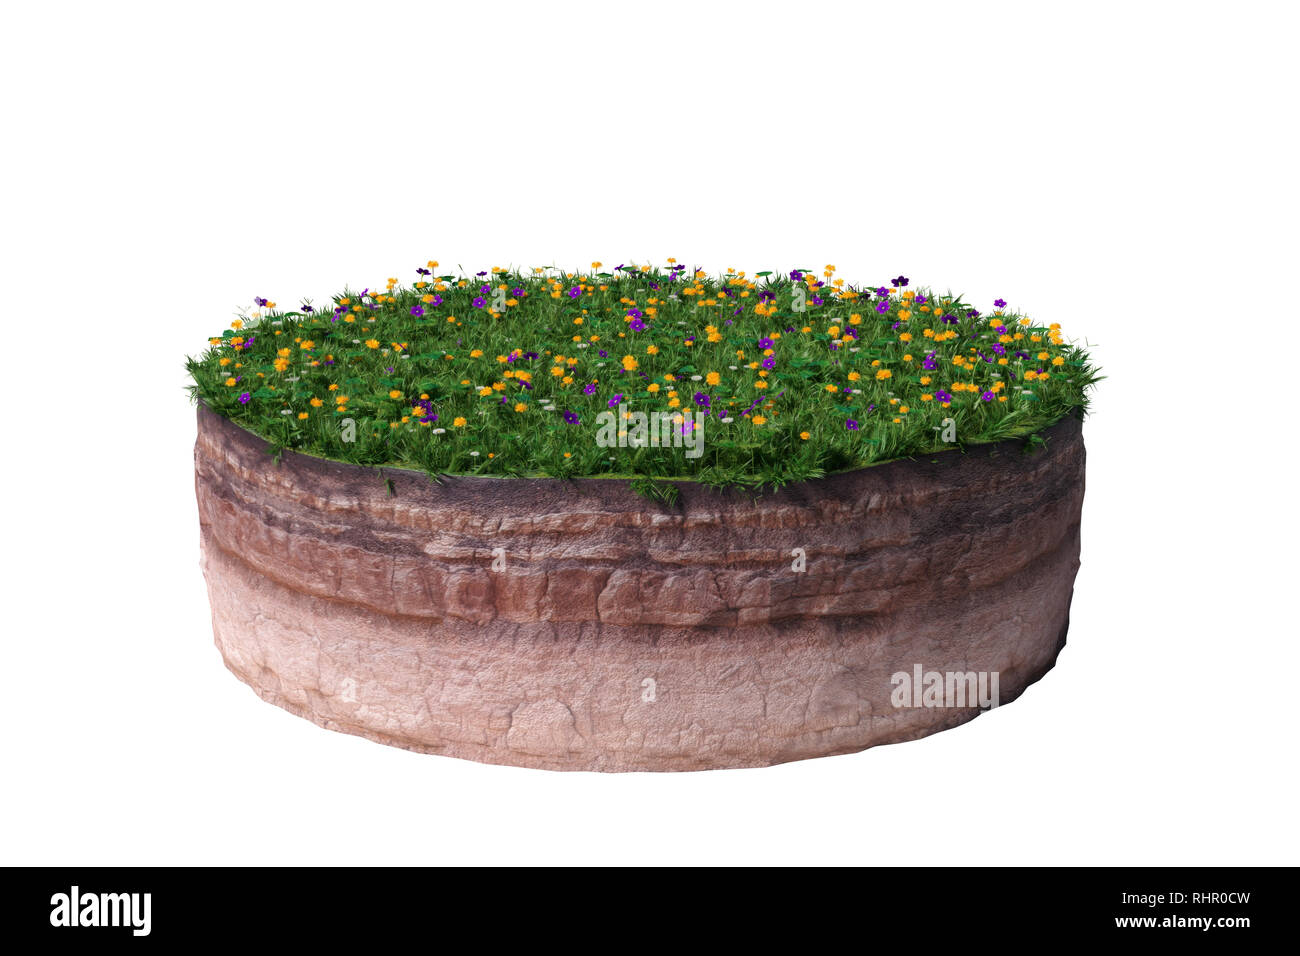 model of a cross section of ground with grass and flowers on the surface (3d illustration, isolated on white background) Stock Photo